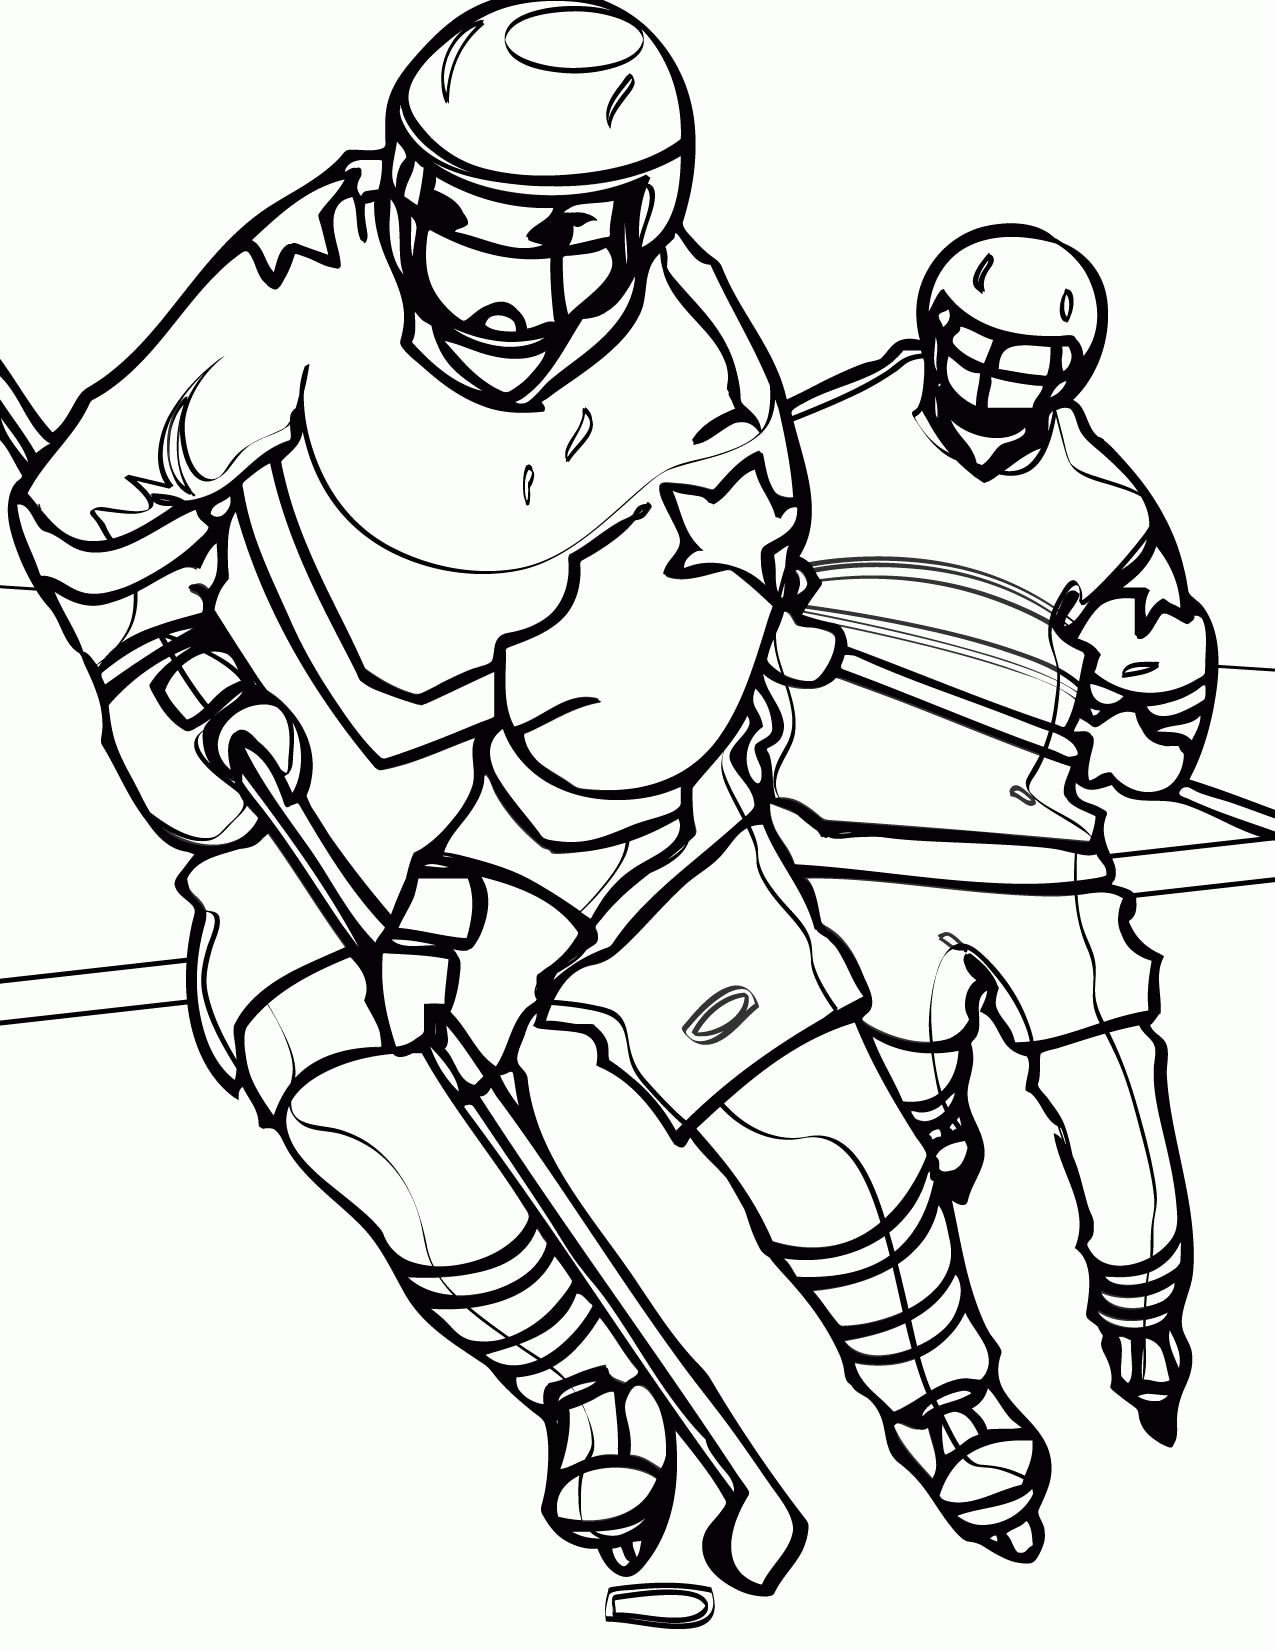 Fun Sports Coloring Page Coloring Home